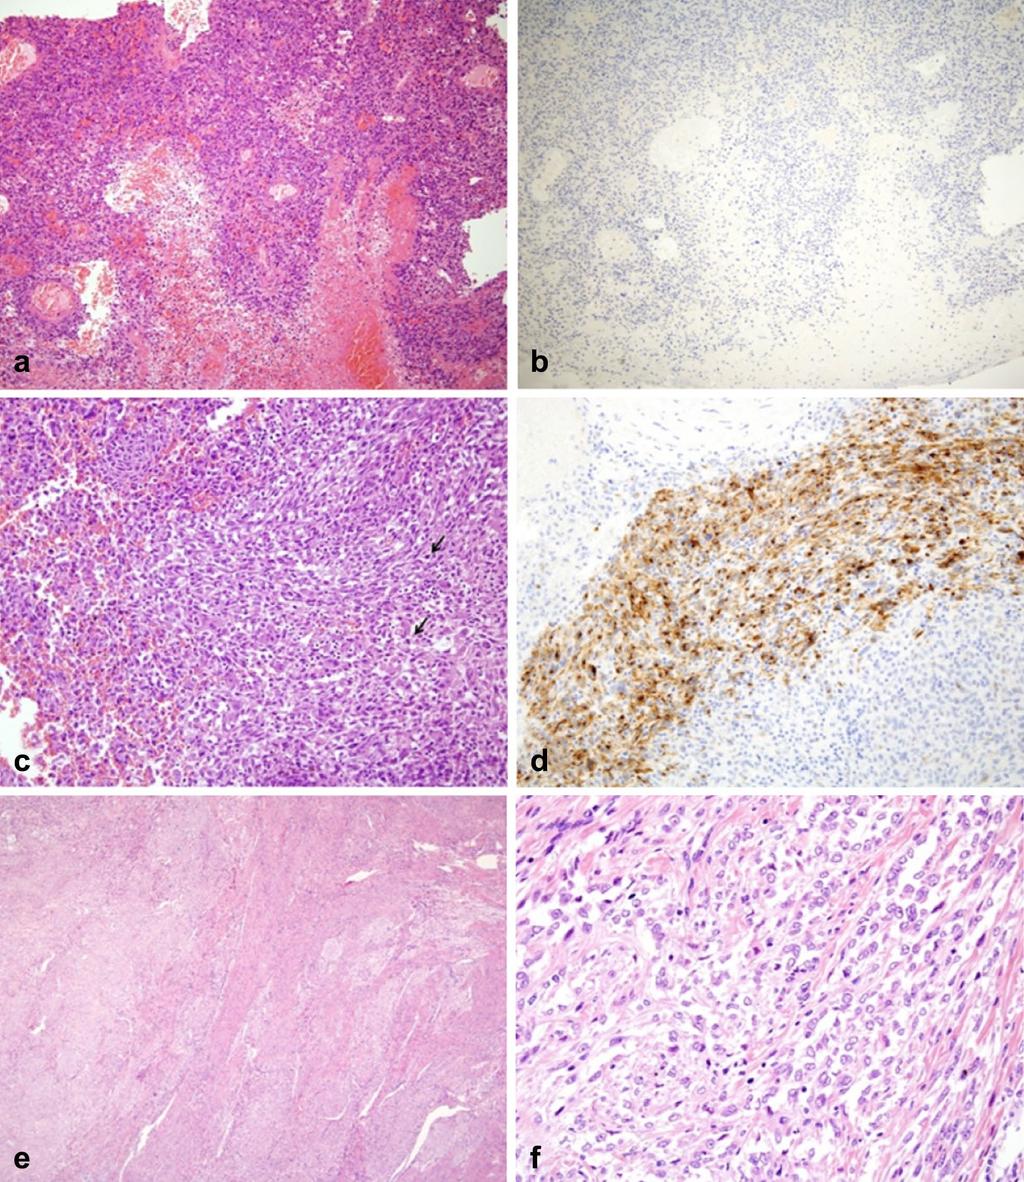 Page 2 of 6 mass was performed. Histologic and immunohistochemical findings (positive for SMA, but negative for HMB45) were malignant tumor, suggestive of leiomyosarcoma (Fig. 1a, b).